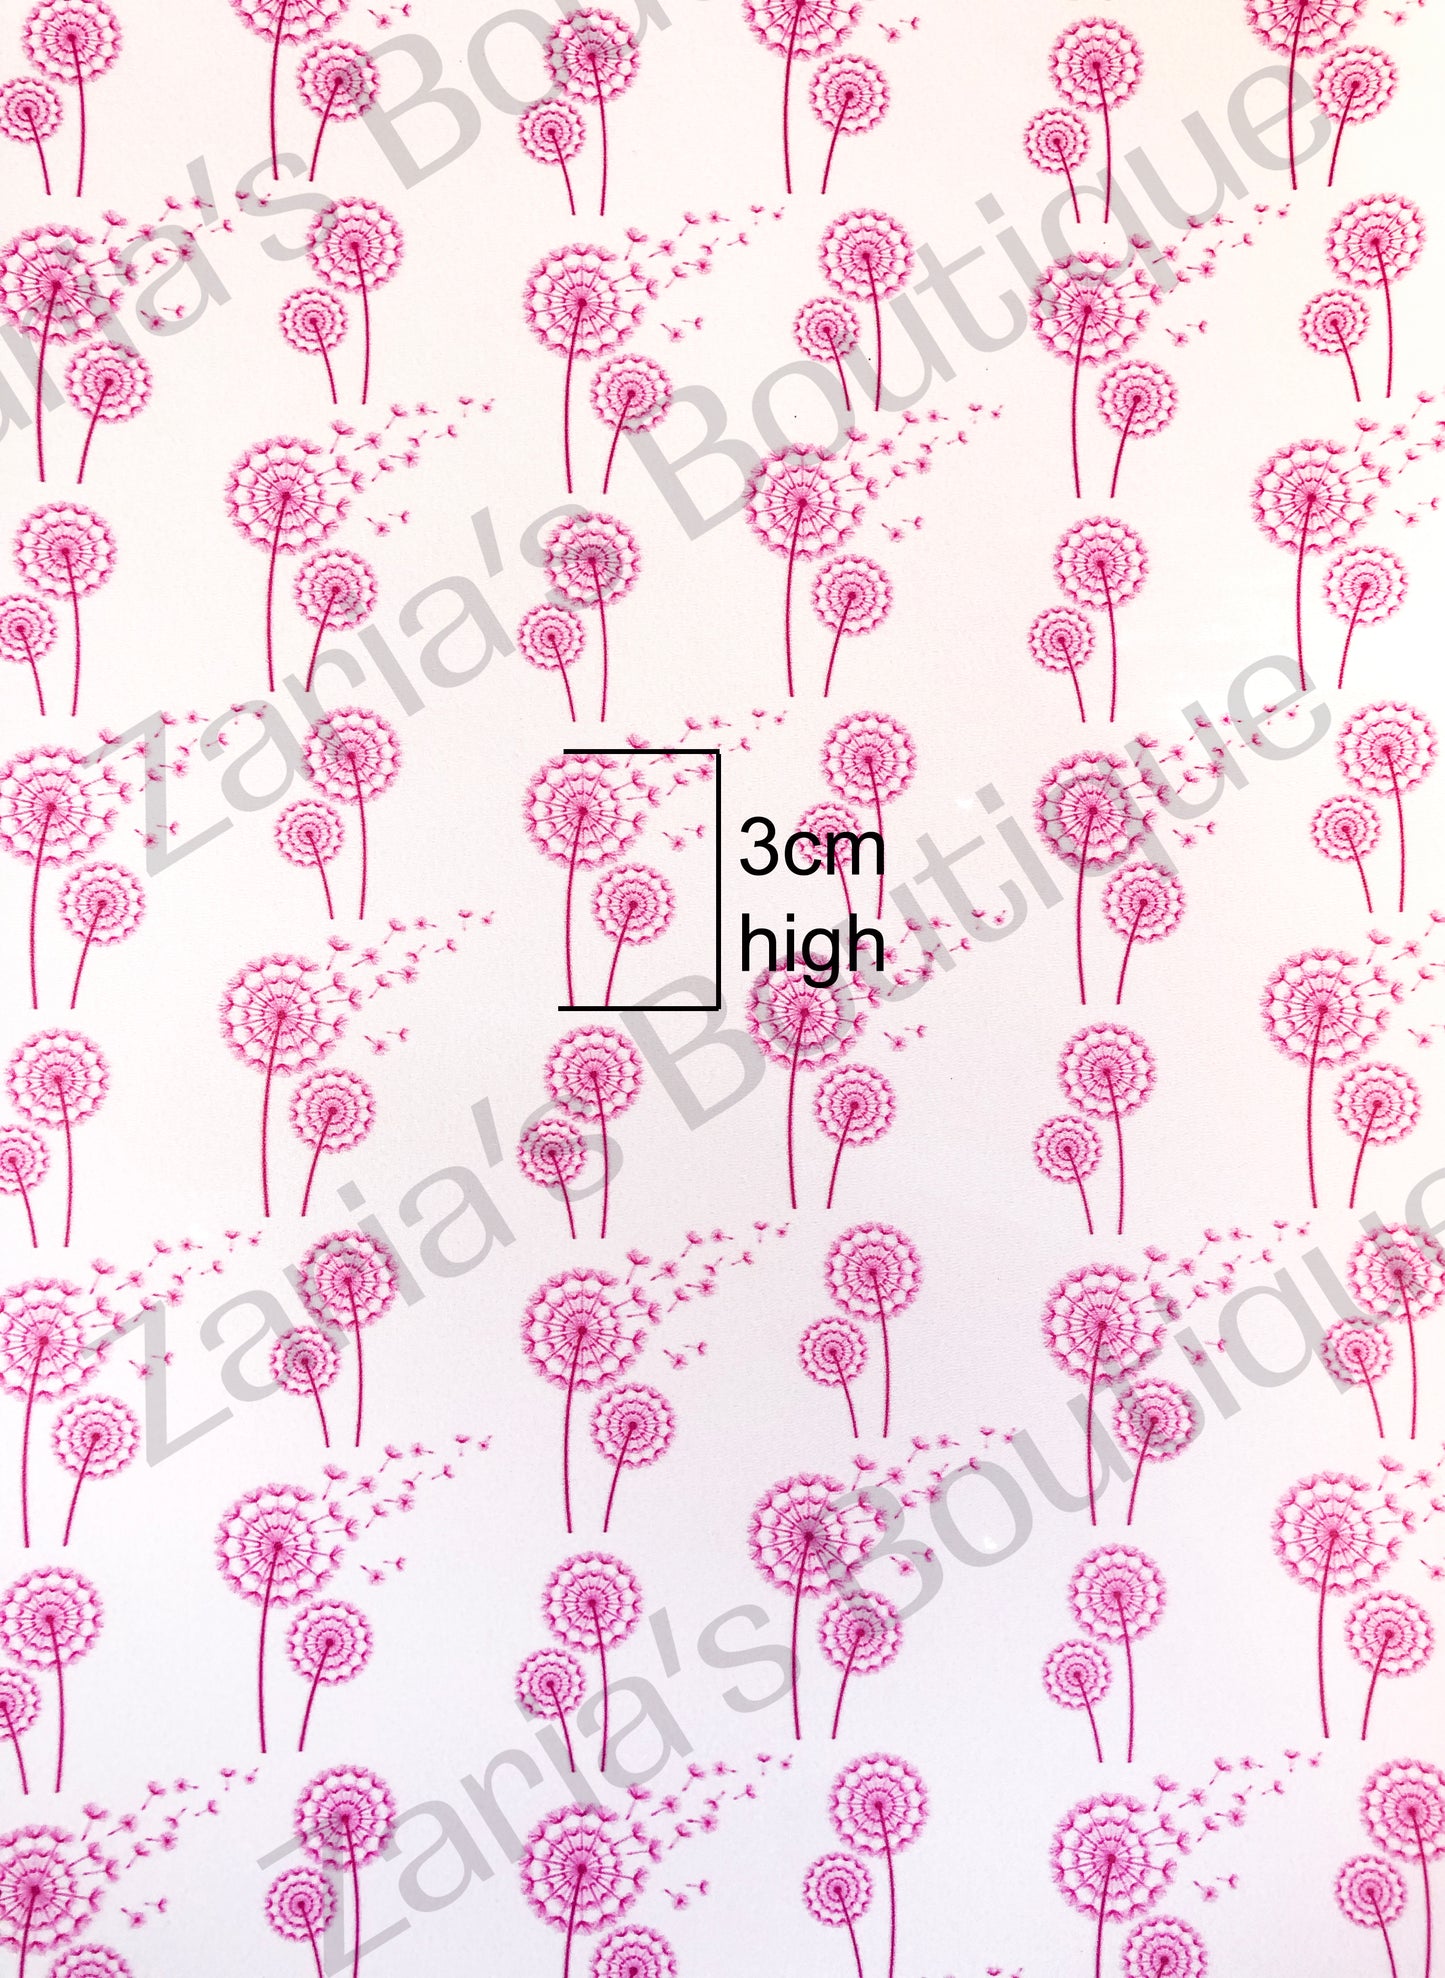 SALE EXCLUSIVE Make A Wish Dandelions ~ Pink ~ Smooth Faux Leather Bow Fabric Sheets